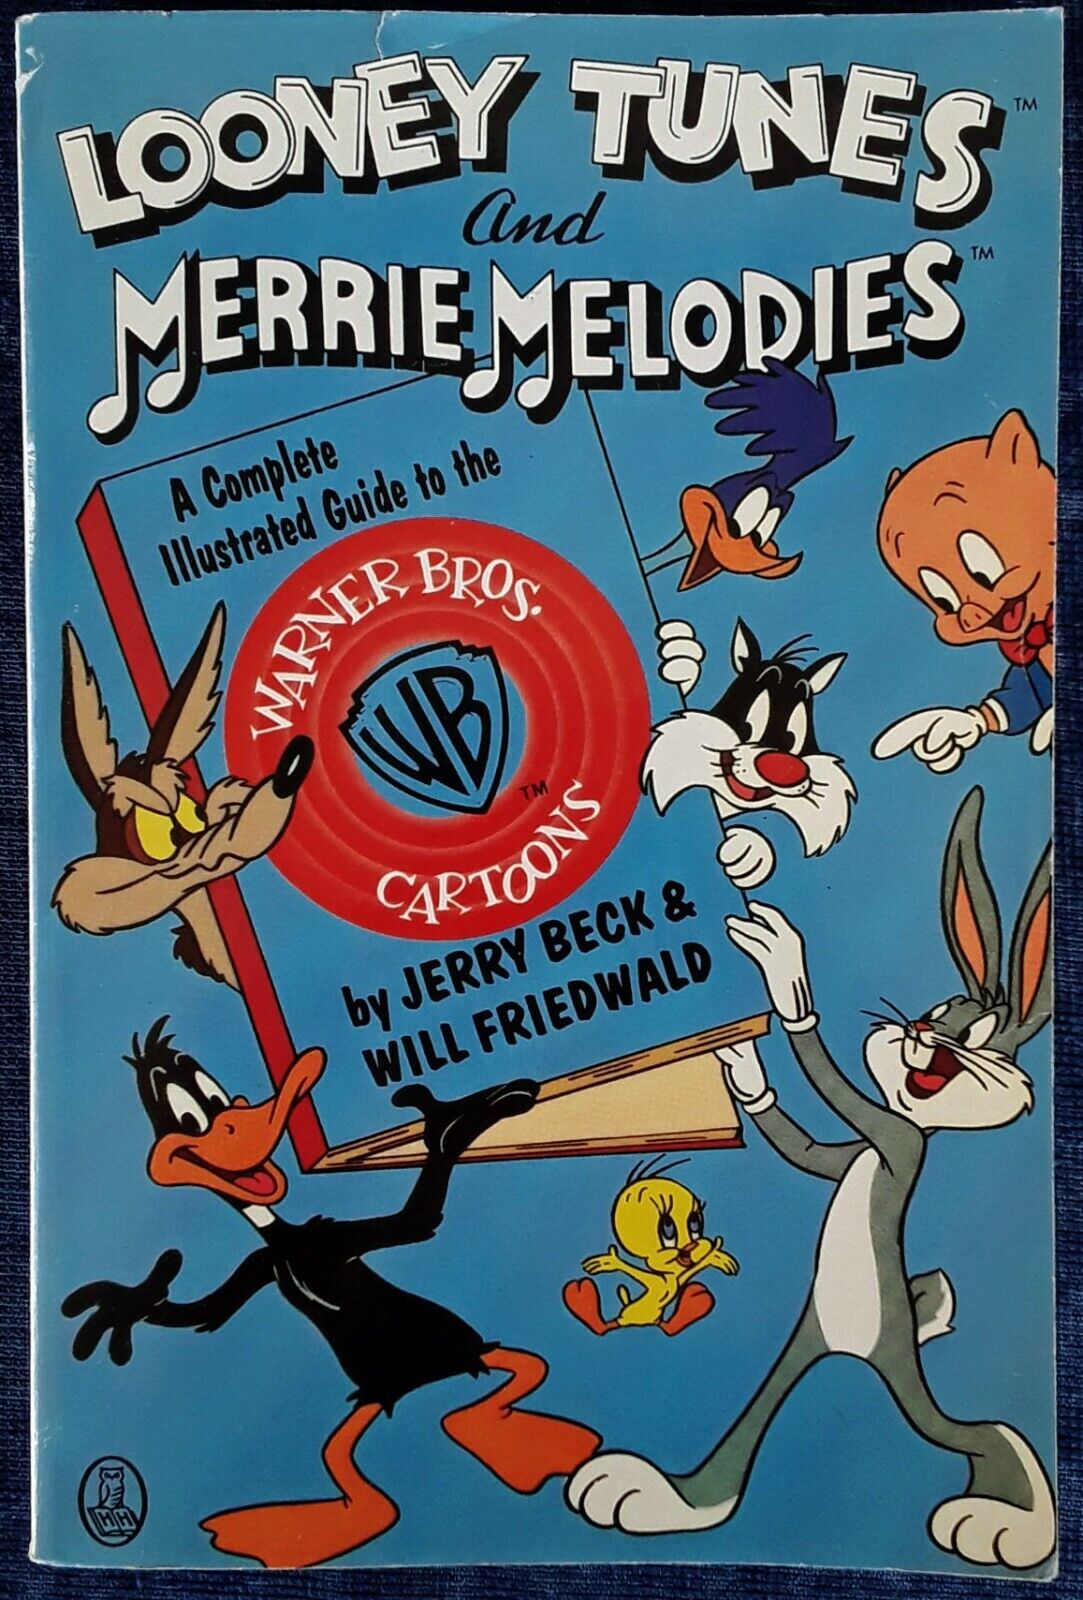 LOONEY TUNES & MERRIE MELODIES - COMPLETE ILLUSTRATED GUIDE TO WB CARTOONS  - PB 9780805008944 | eBay